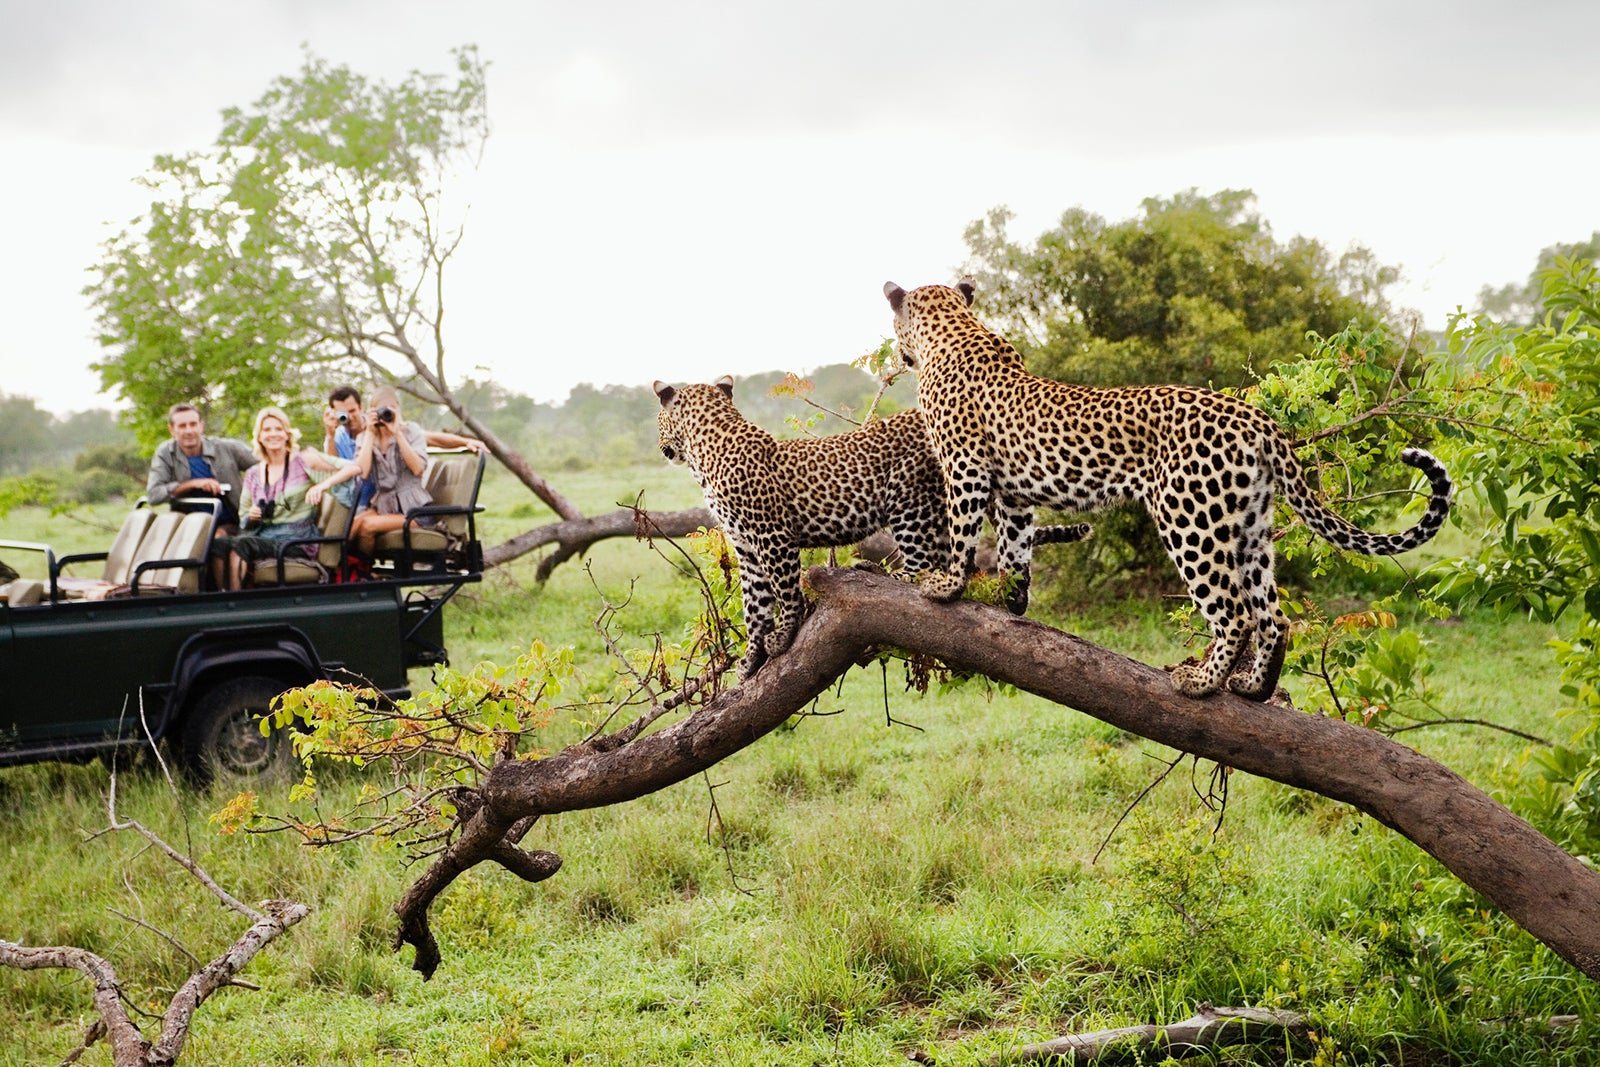 Photo of two wild leopards standing on a tree branch looking at tourists on safari in a jeep.